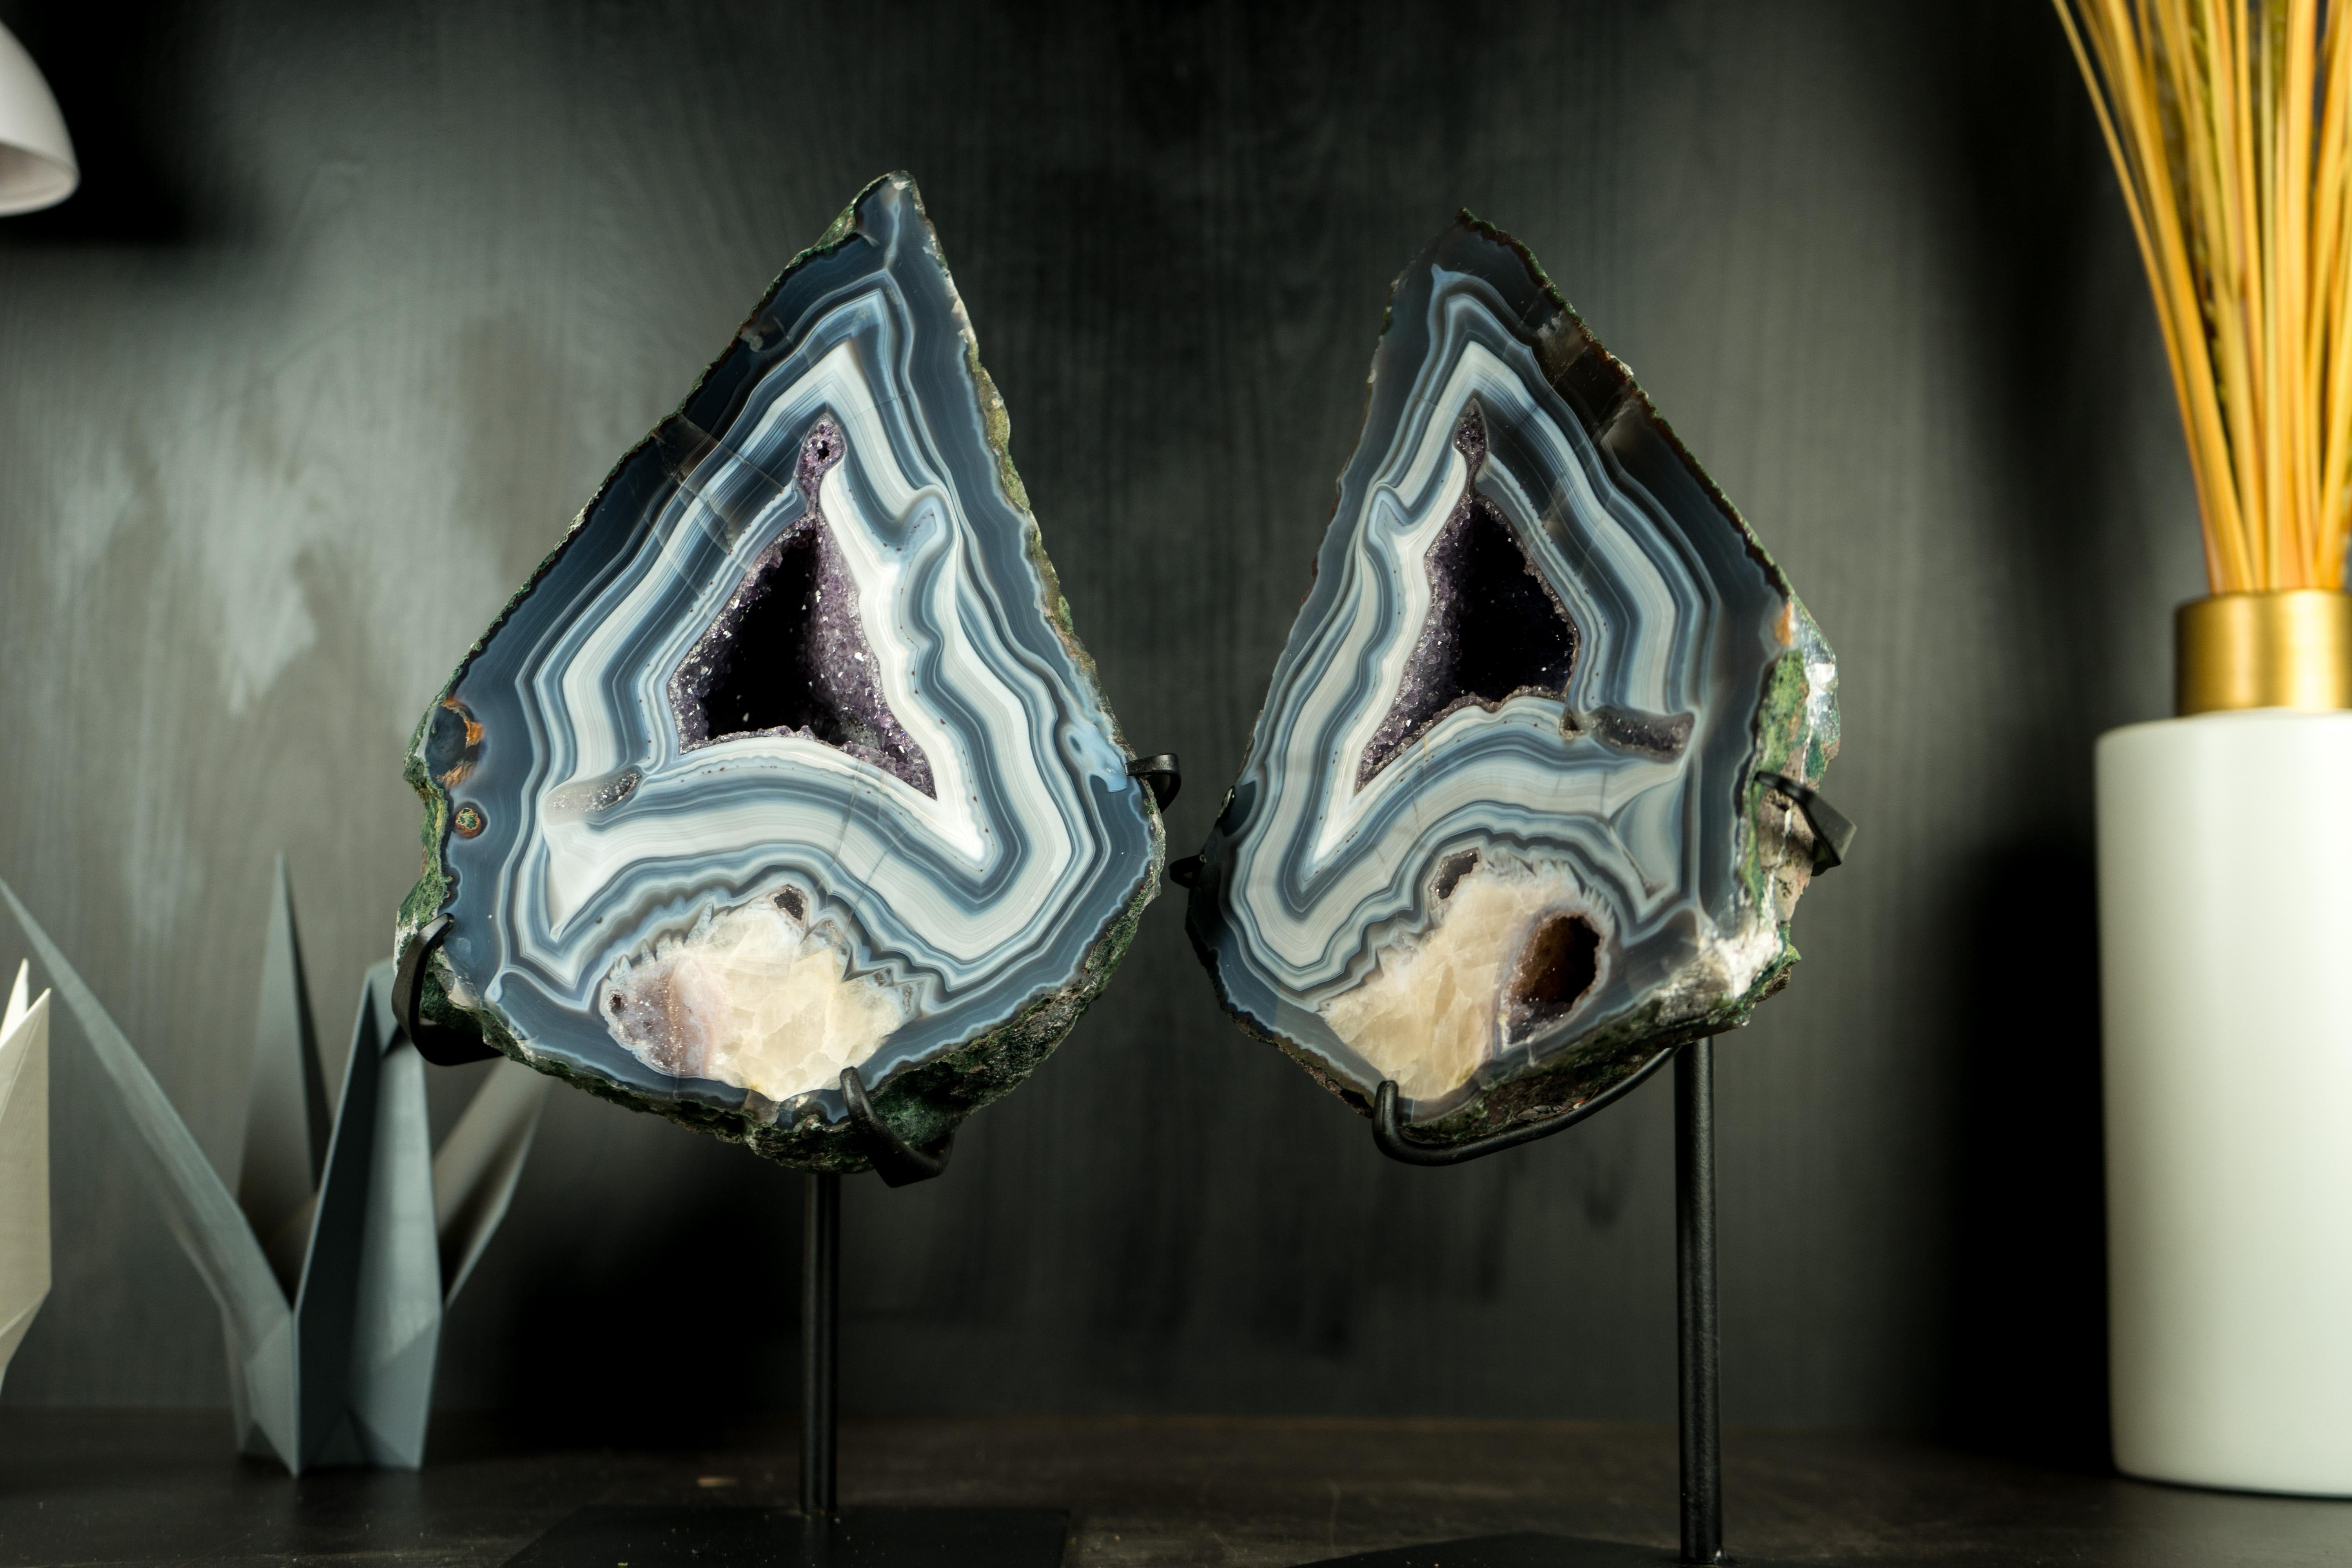 Collector's Bookmatching Pair of Blue Lace Agate Geodes: Harmoniously Matched with Rare Formations, Bold White and Blue Laces, and Calcite Flower Inclusions

▫️ Description

Crafted by nature, these rare and remarkable Blue Lace Agate Geodes are a